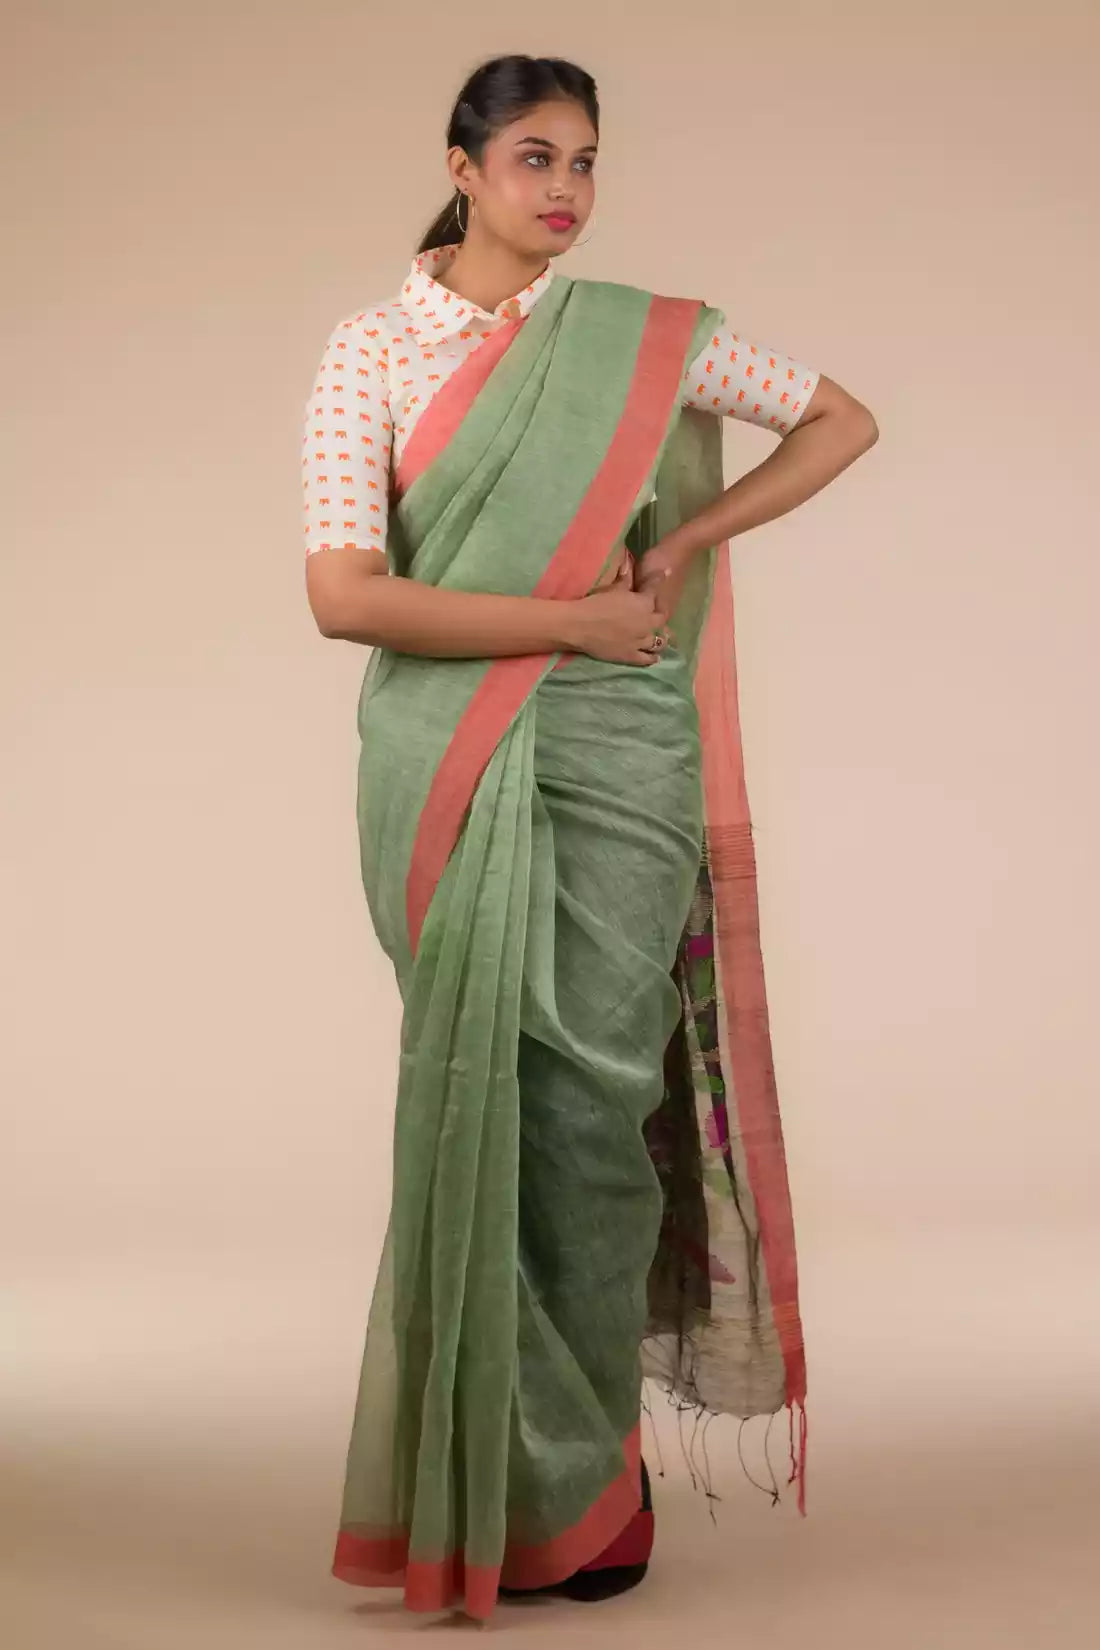 A lady in Pista green with jamdani pallu In Silk Linen Saree standing against a beige background.